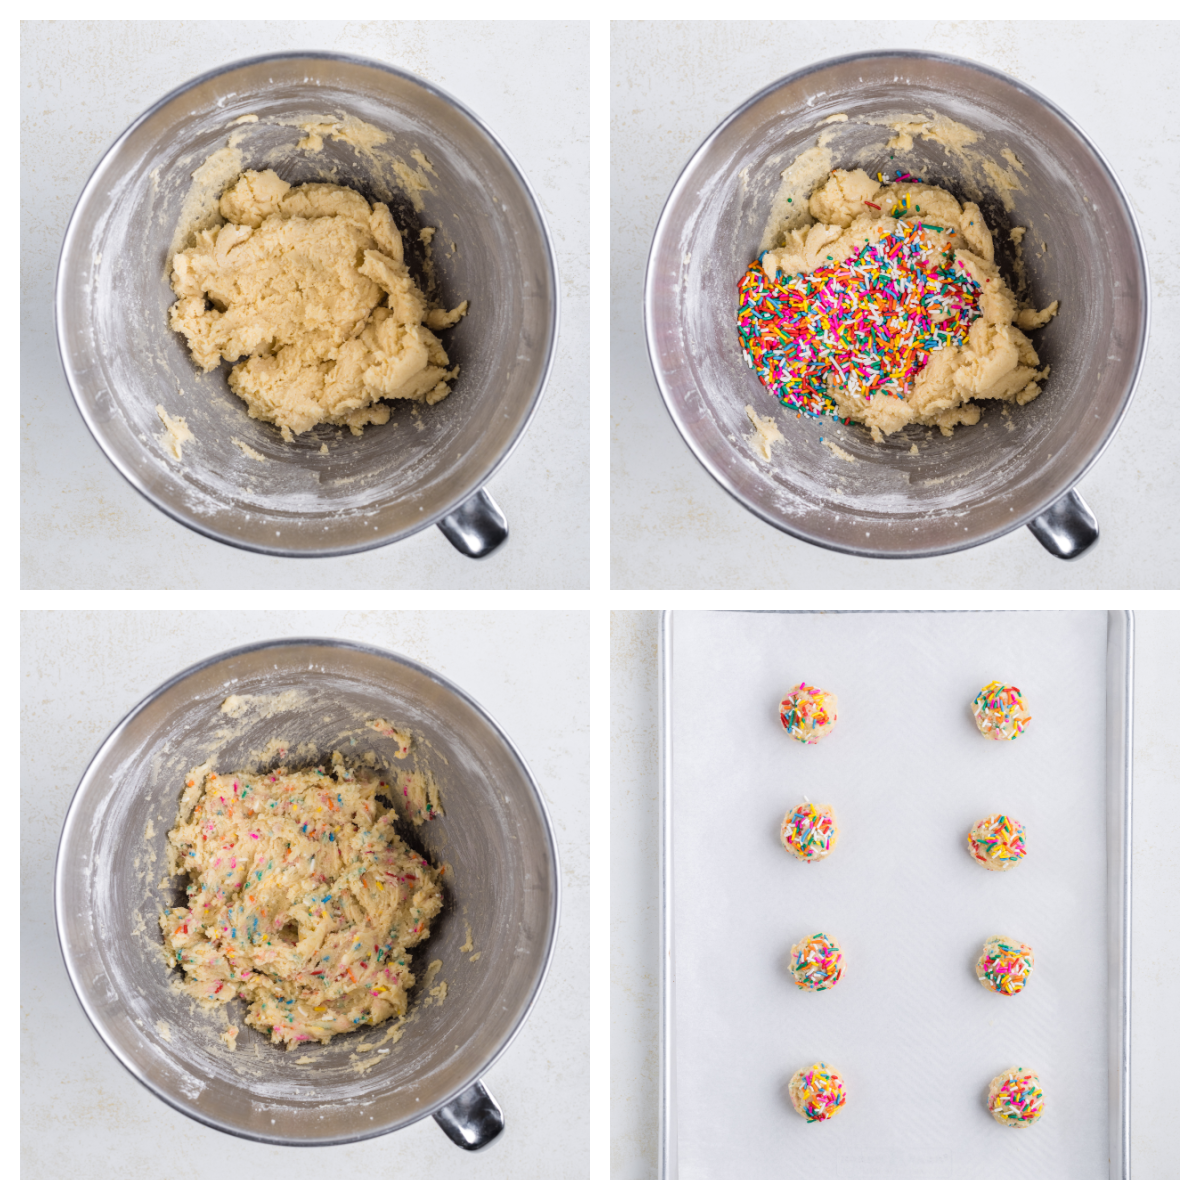 photos showing how to make the cookie dough